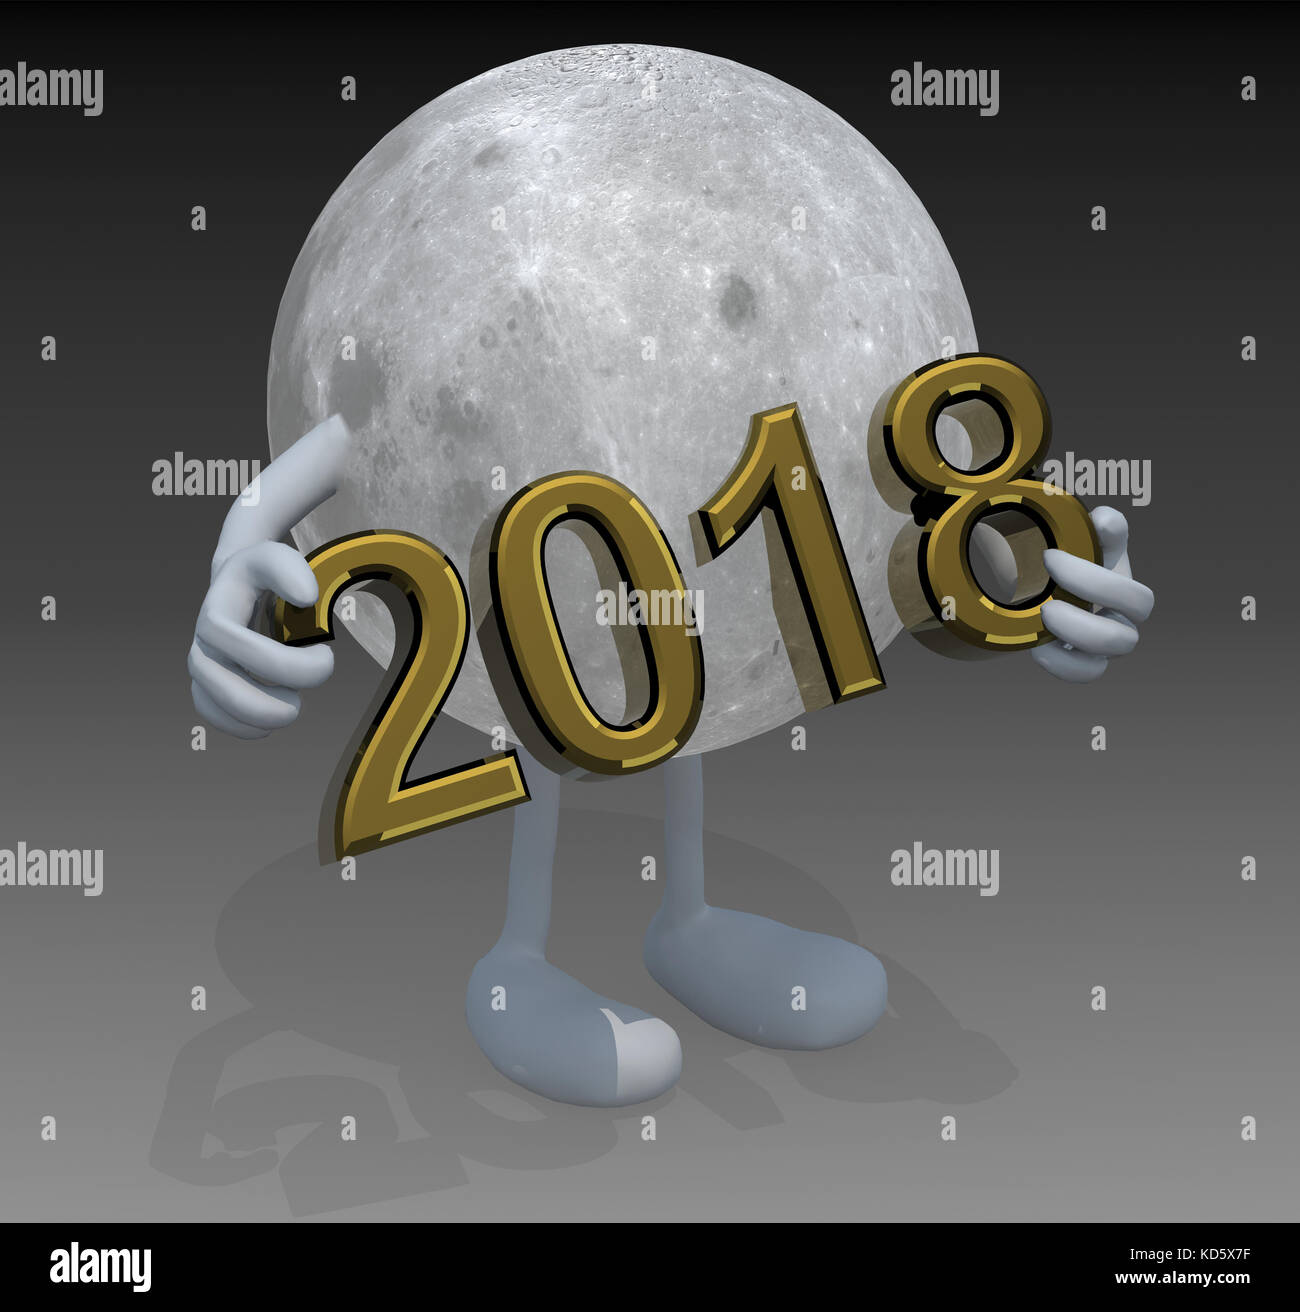 moon planet with arms, legs and the 3D inscription 2018, 3d illustration. Elements of this image furnished by NASA. Stock Photo